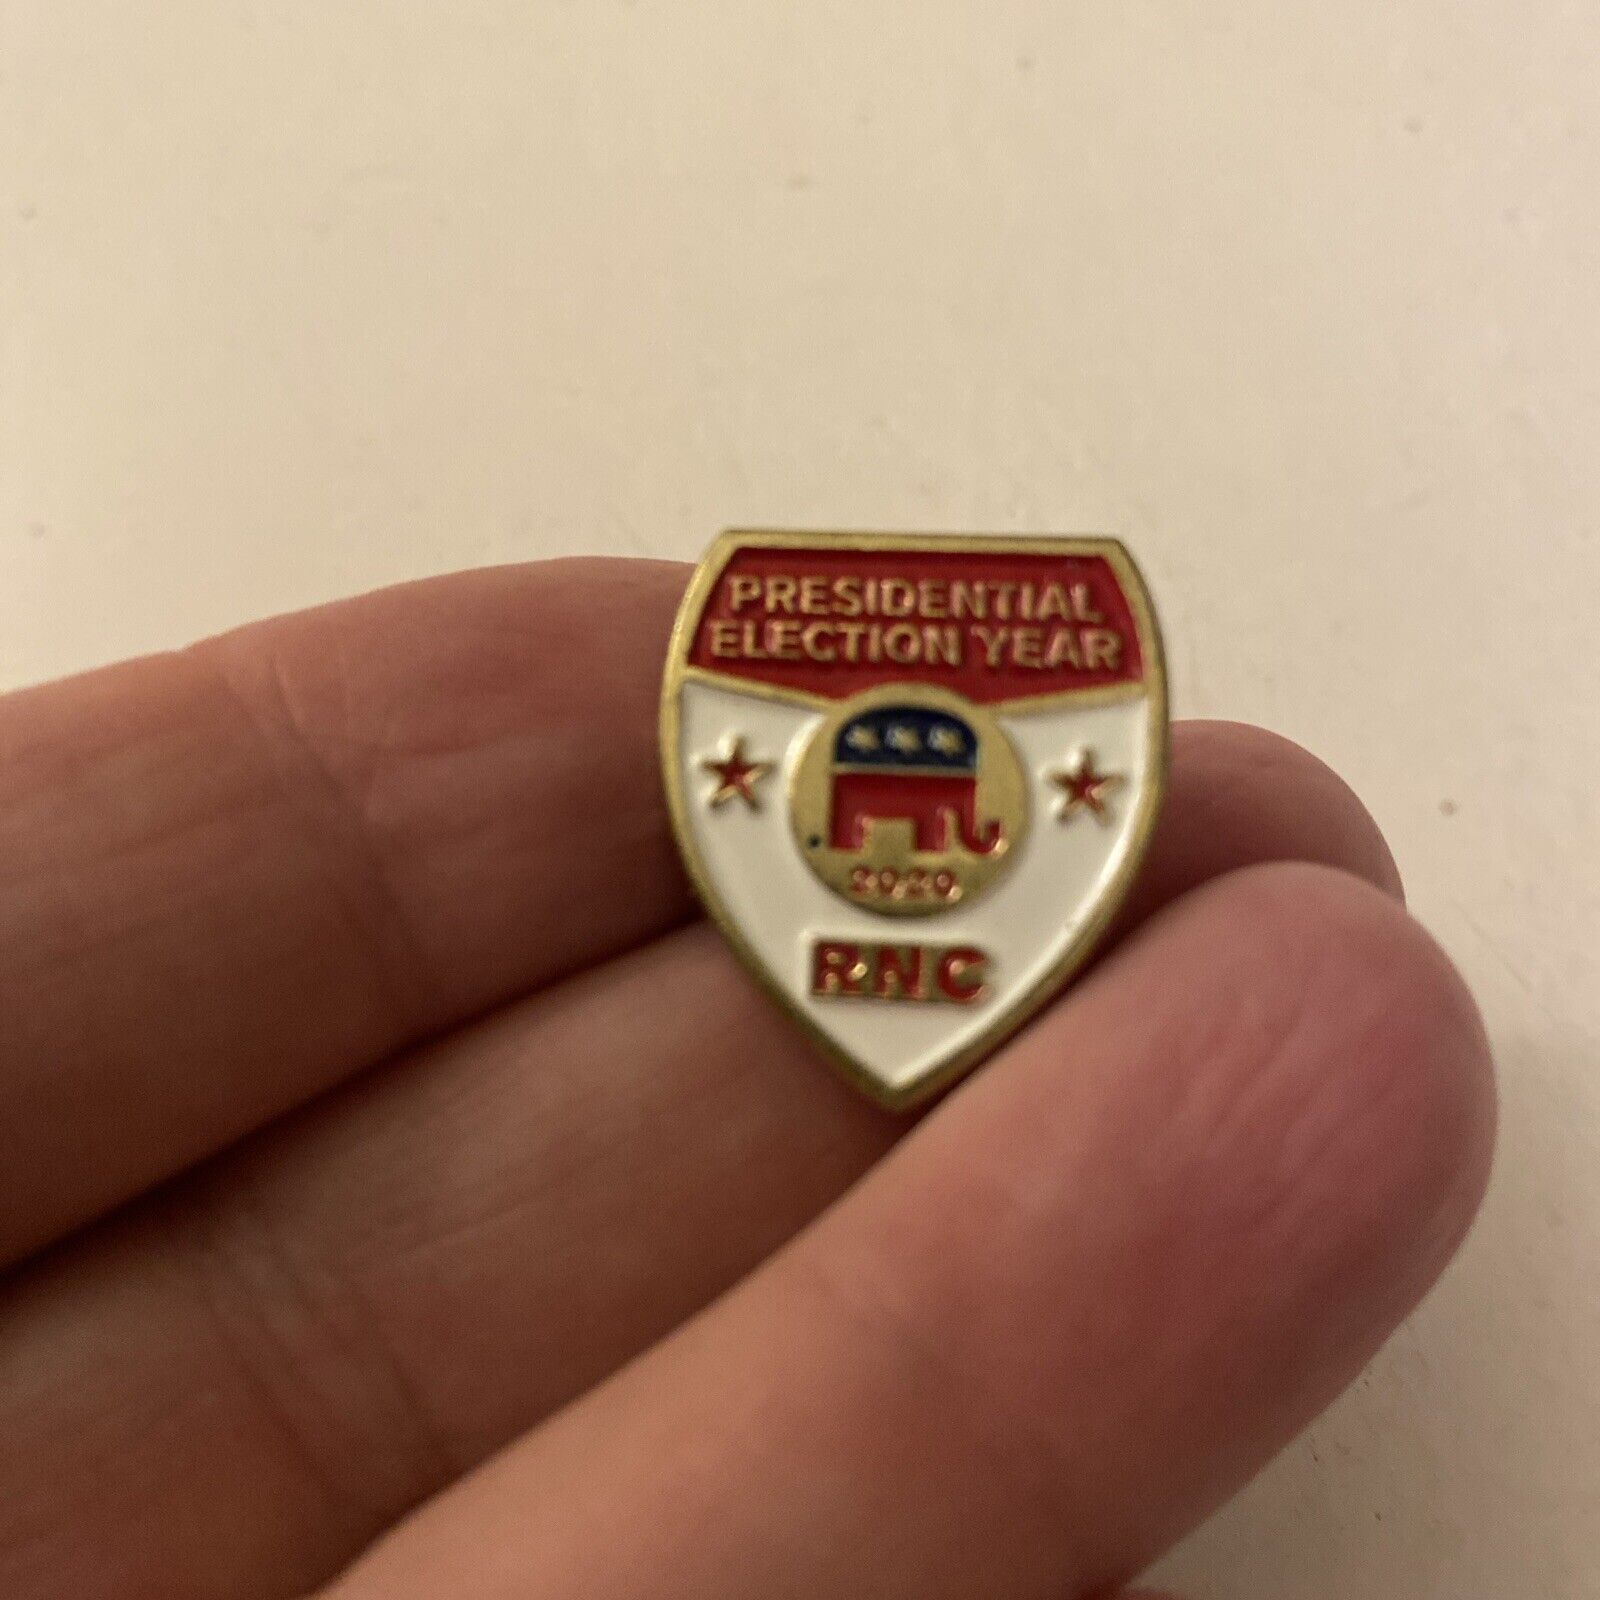 RNC 2020 Presidential Election Year Lapel Pin